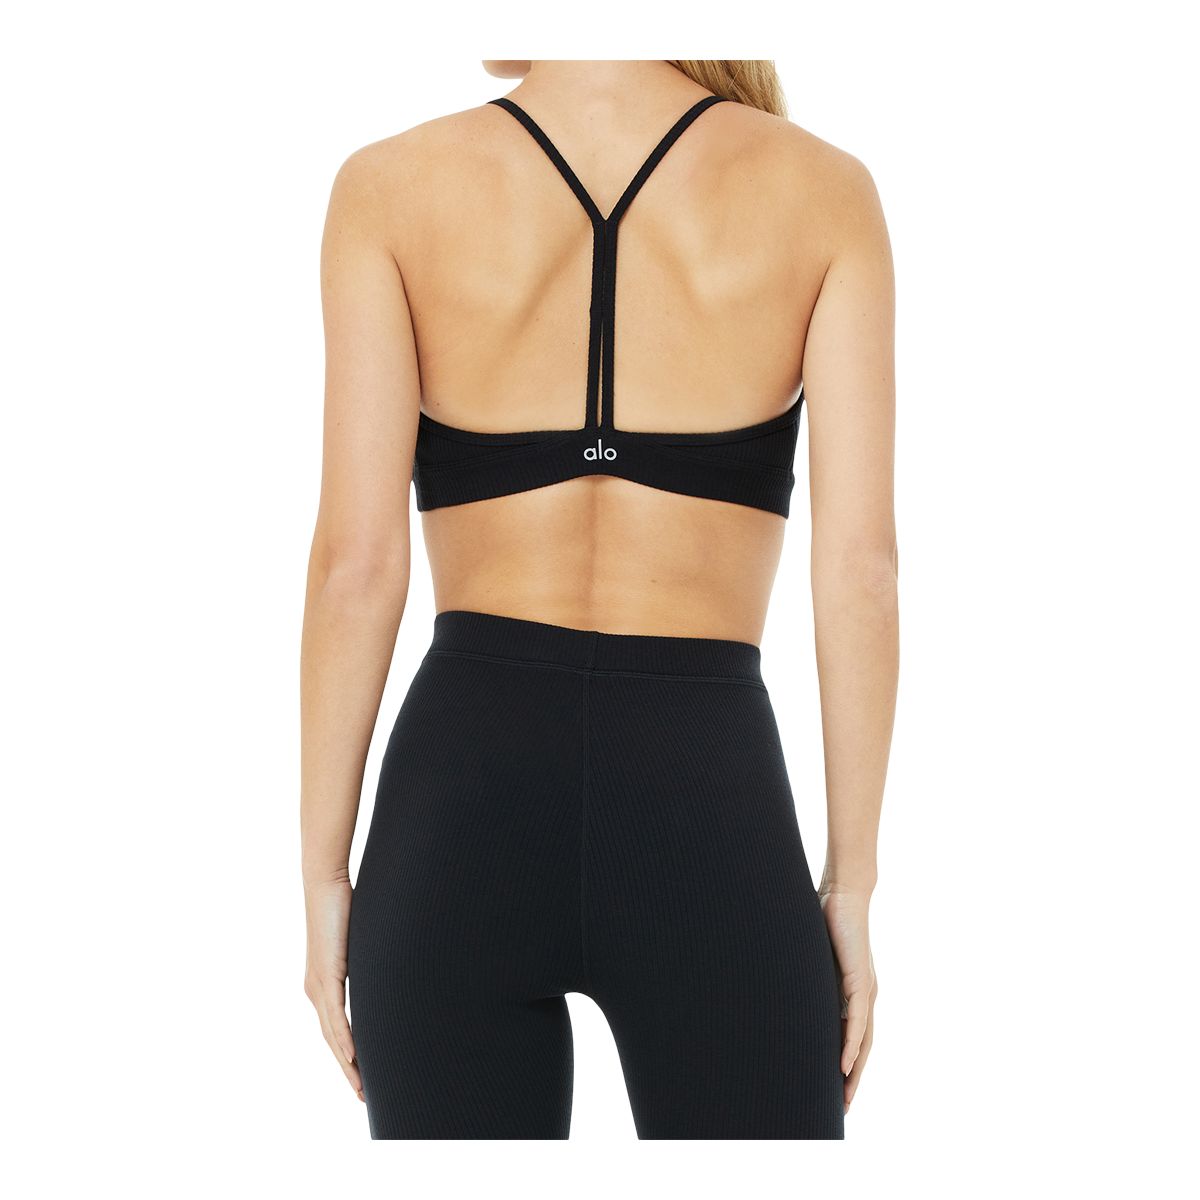 https://media-www.atmosphere.ca/product/div-03-softgoods/dpt-70-athletic-clothing/sdpt-02-womens/333496555/alo-w-ribbed-blussful-bra-q2-black-xs--f47487c1-fc1b-41af-80f2-c4c35d804ee2-jpgrendition.jpg?imdensity=1&imwidth=1244&impolicy=mZoom